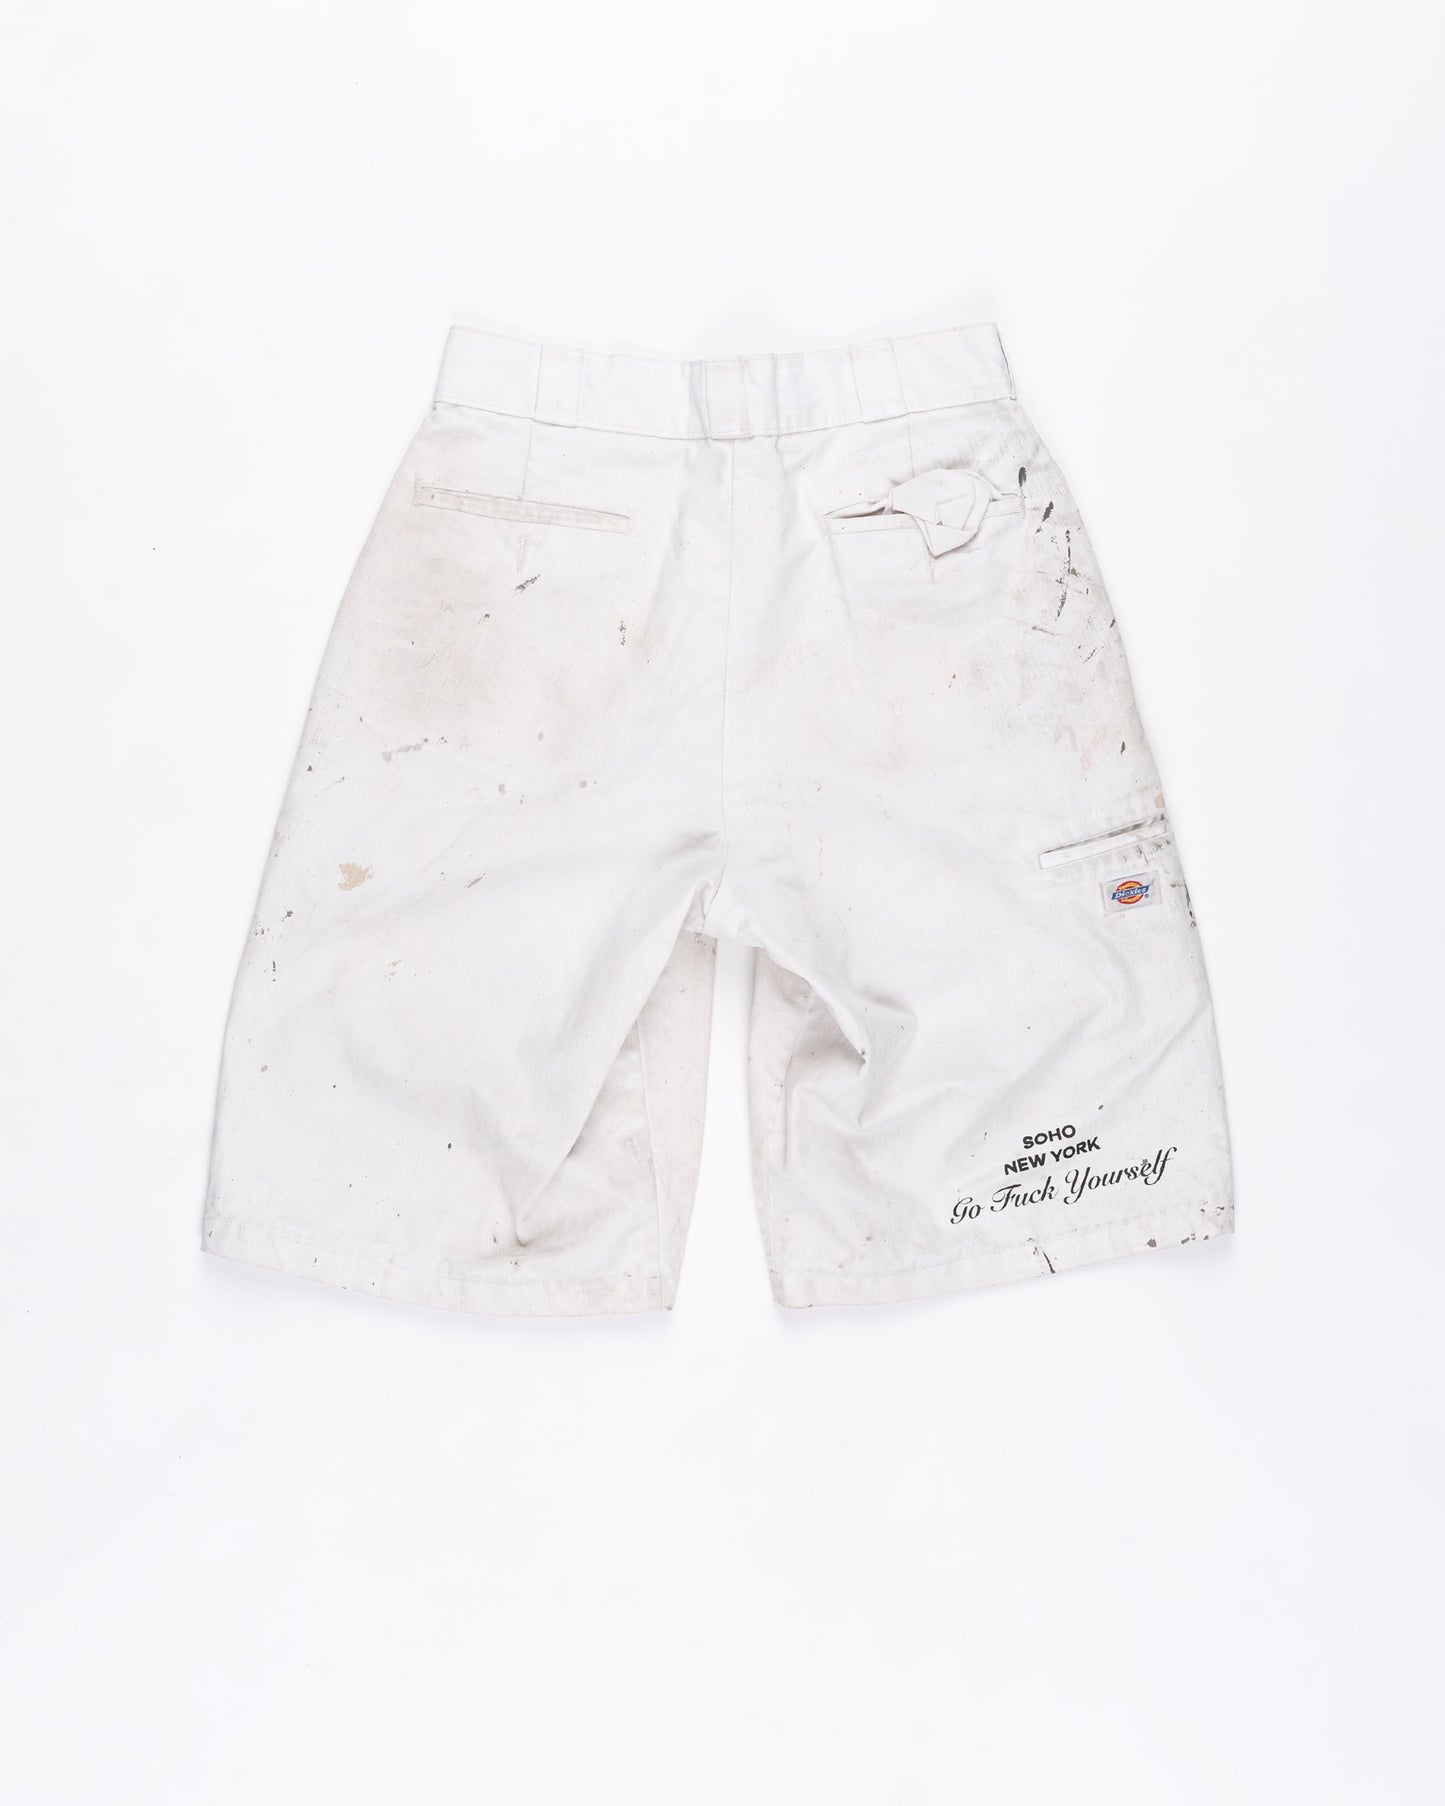 White Destroyed Dickies Cut Off Shorts Size: 32